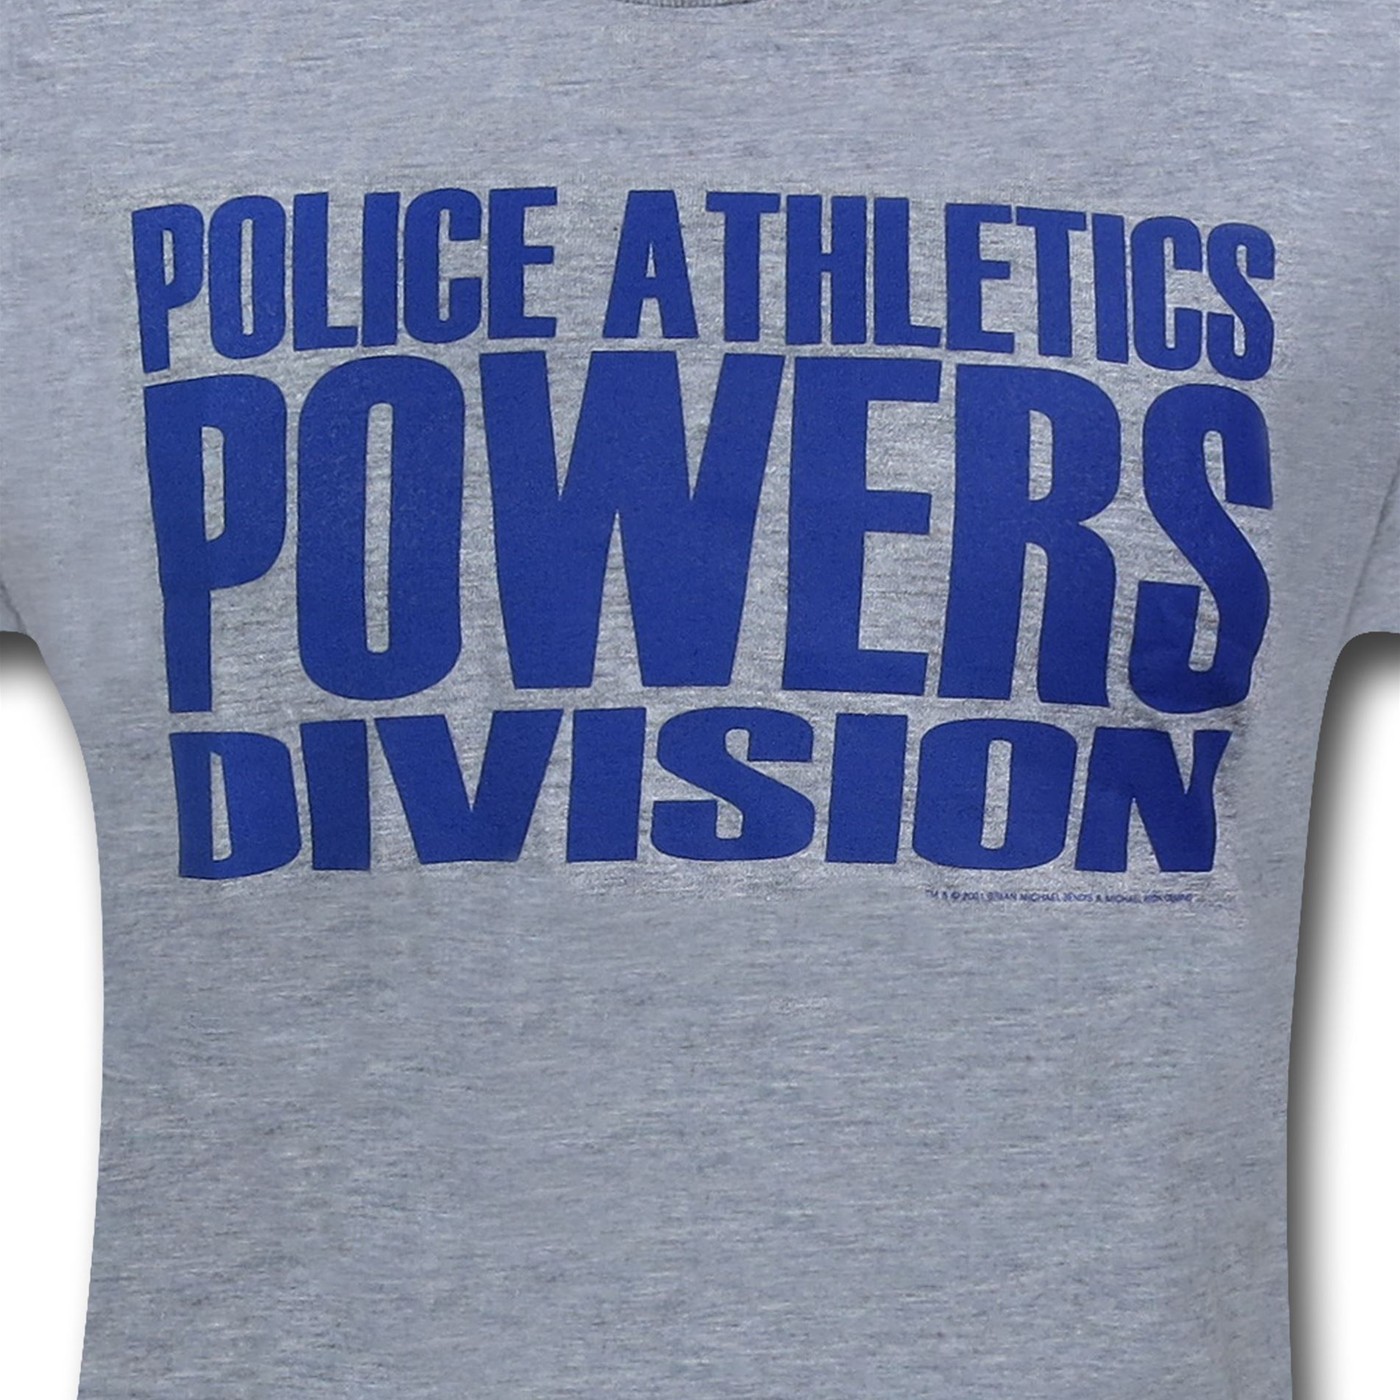 Police Athletic Powers Division T-Shirt